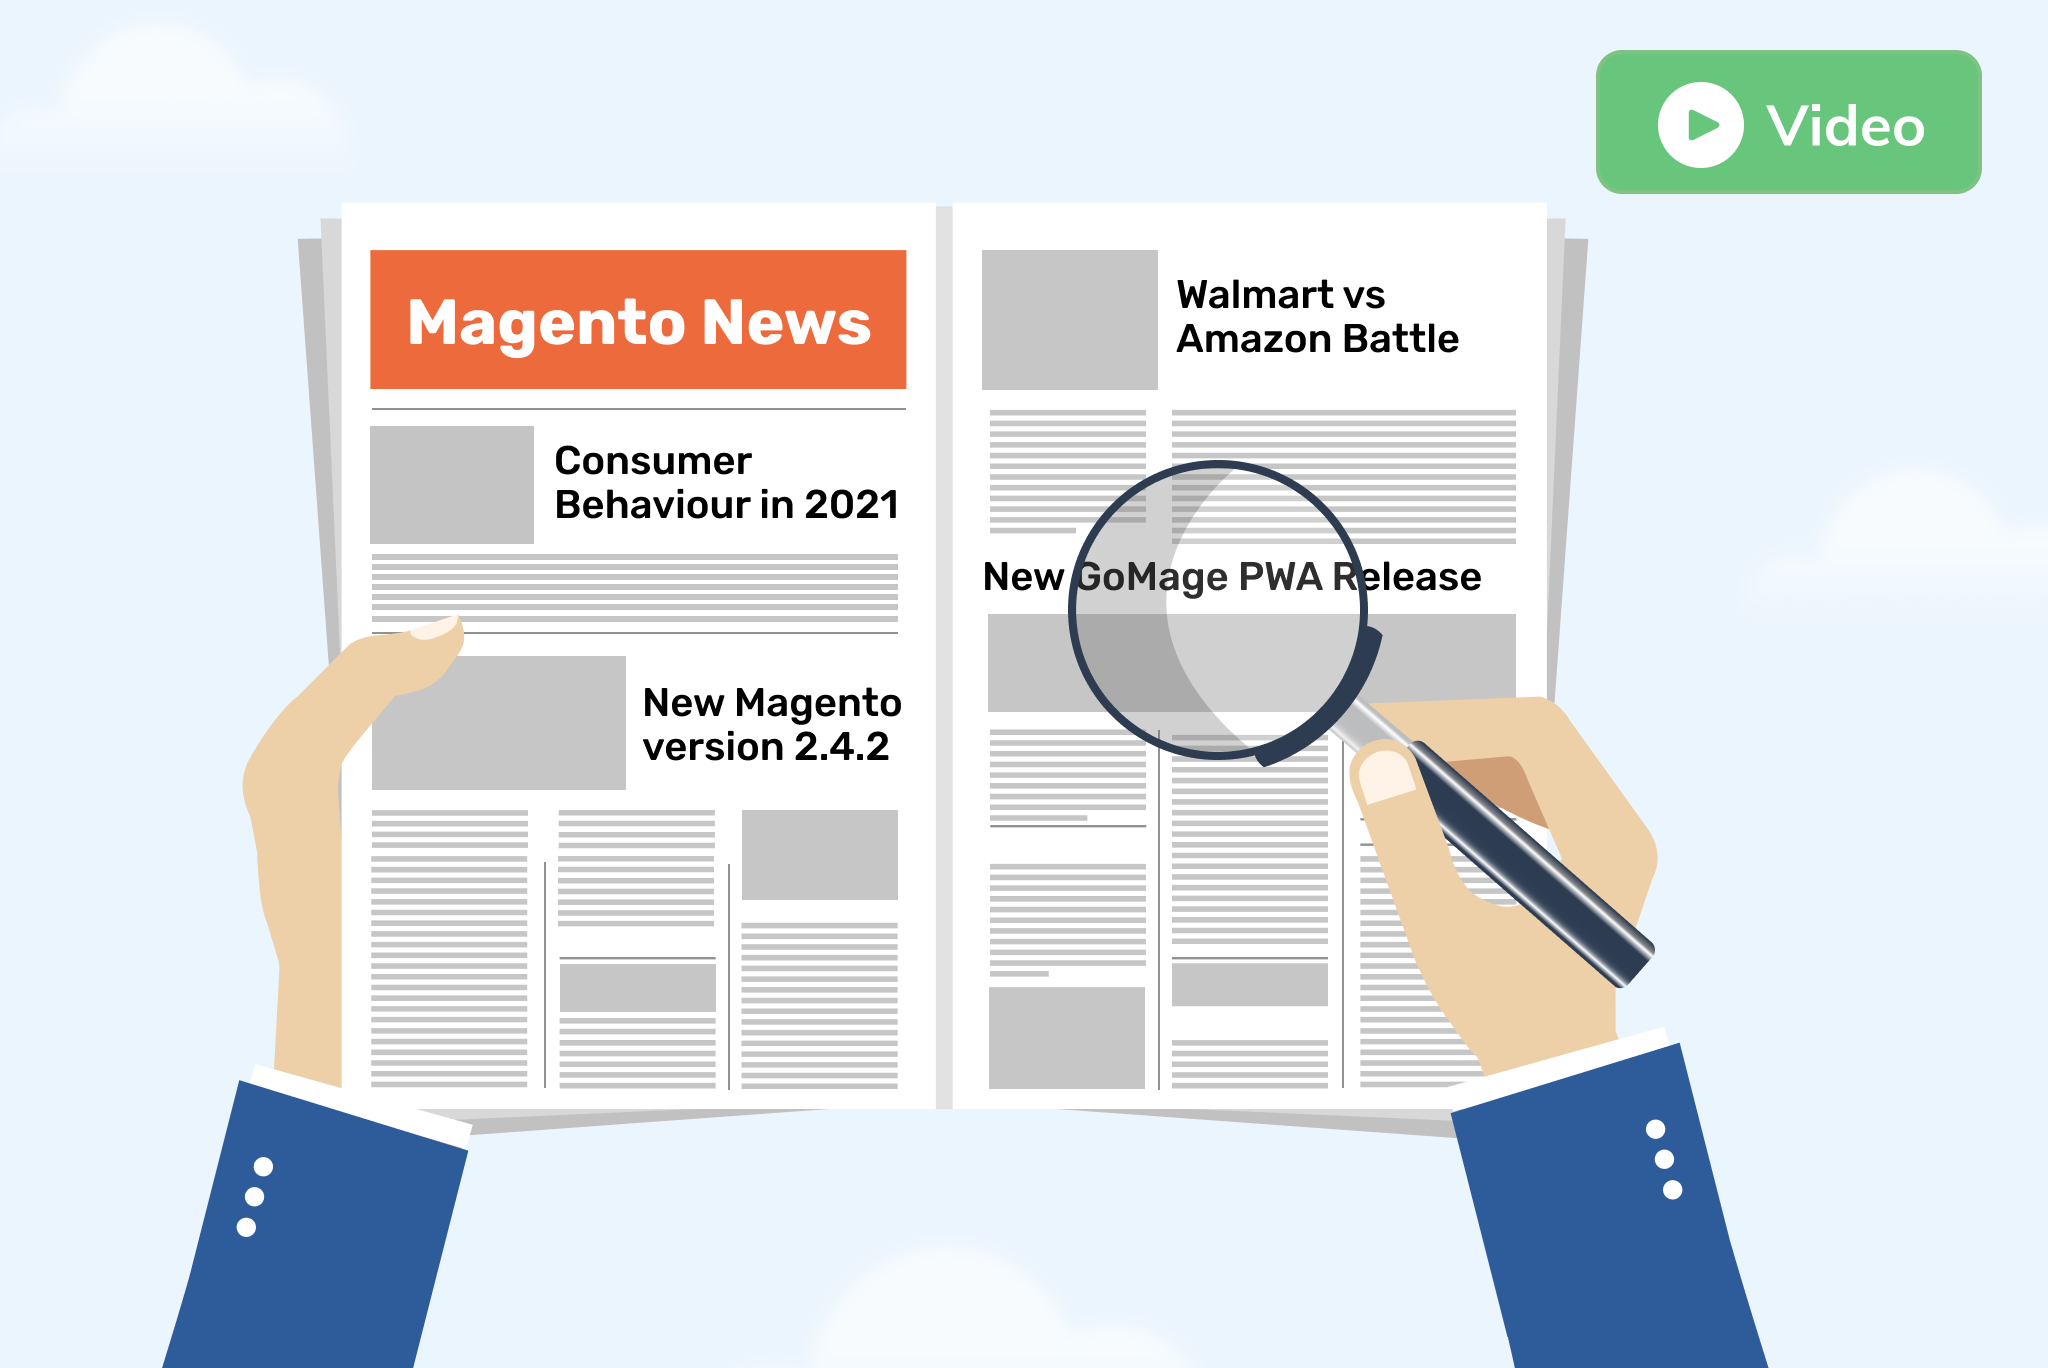 Magento News: Highlights of Key Events in February 2021